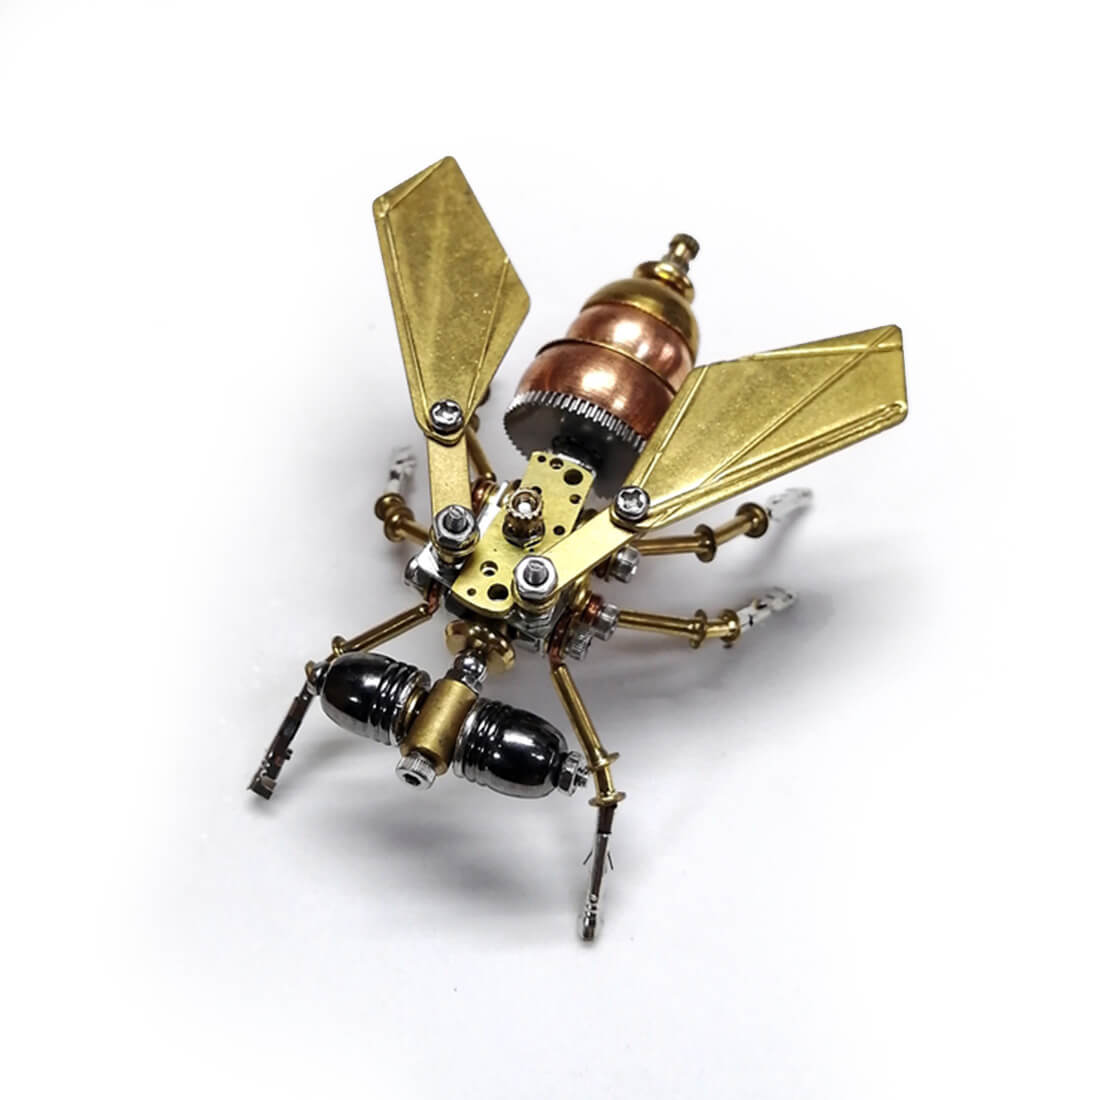 Little Fly 3D DIY Steampunk Mechanical Insect Metal Assembly Model (100+PCS)